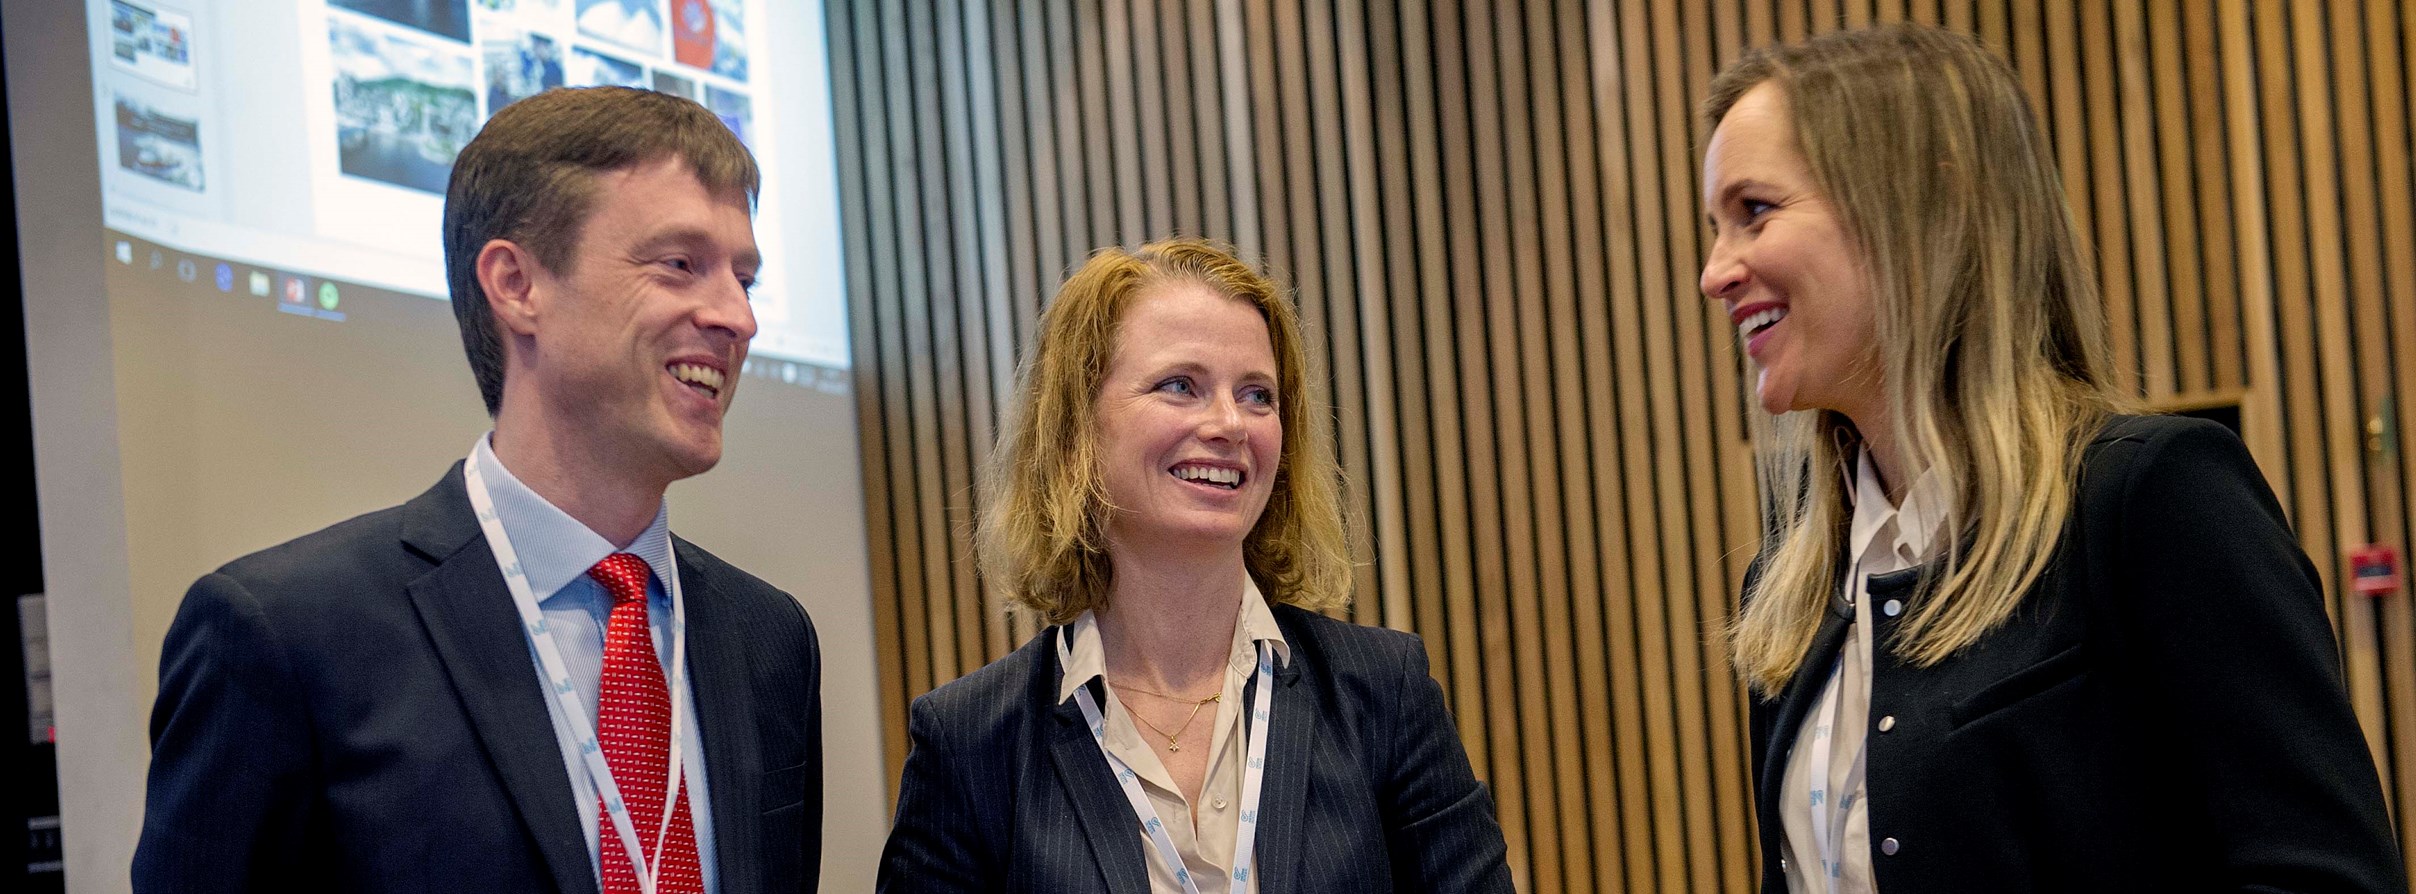 Professor Roar O. Ådland (NHHs Centre for Shipping and Logistics), CEO Hege Økland (NCE Maritime CleanTech) and Line S. Ulvesæter (Wista).